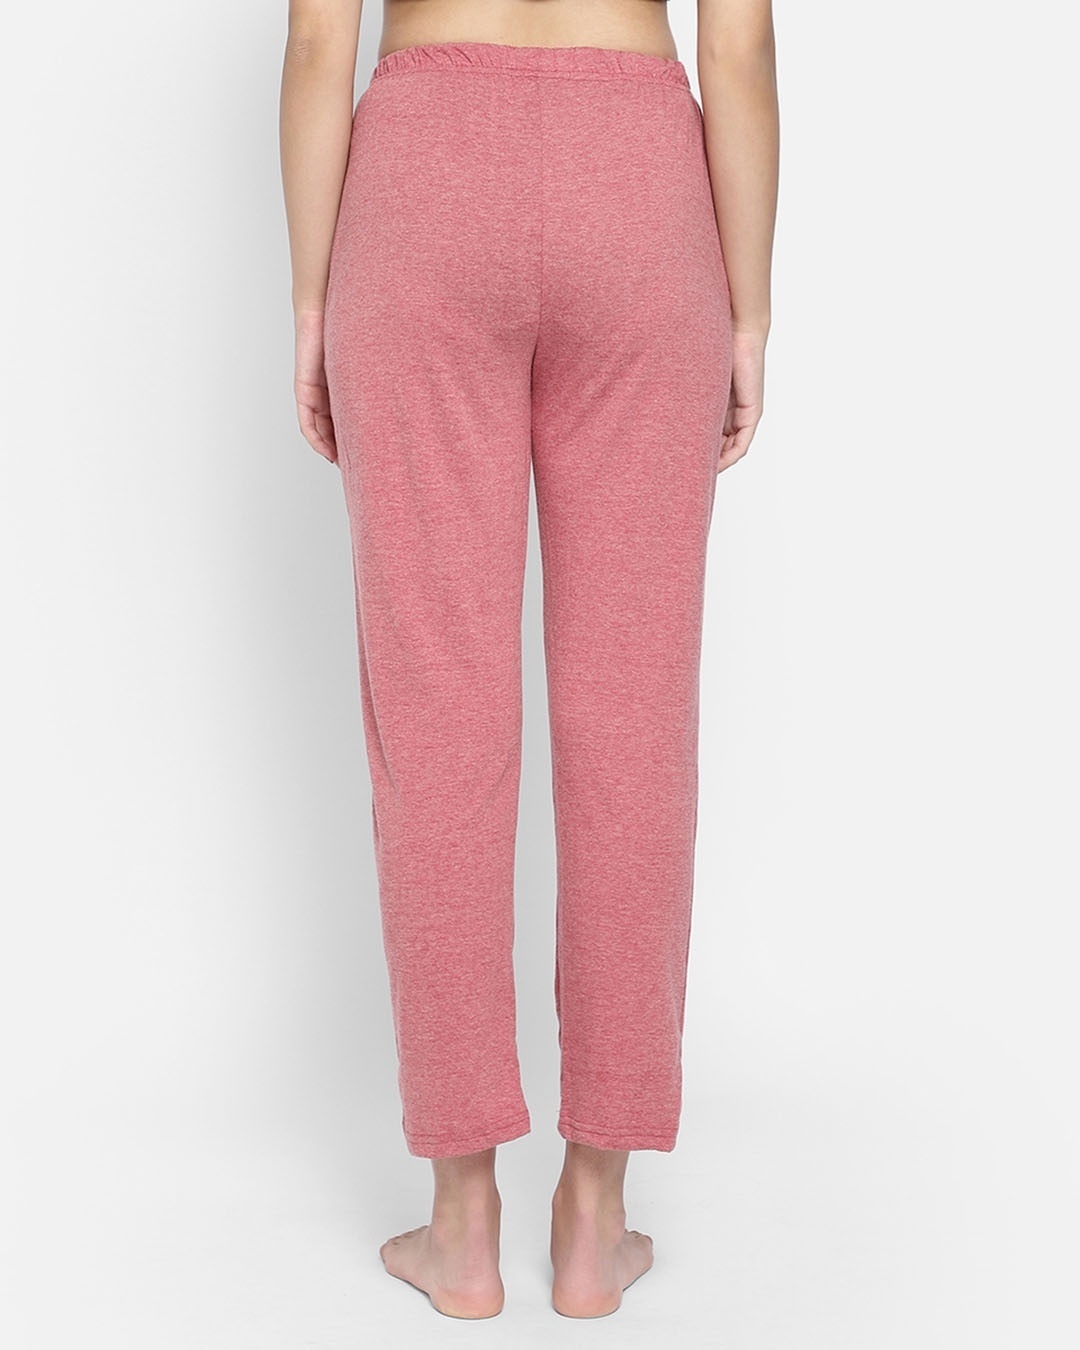 Shop Chic Basic Pyjama In Dusty Pink   Cotton Rich-Back